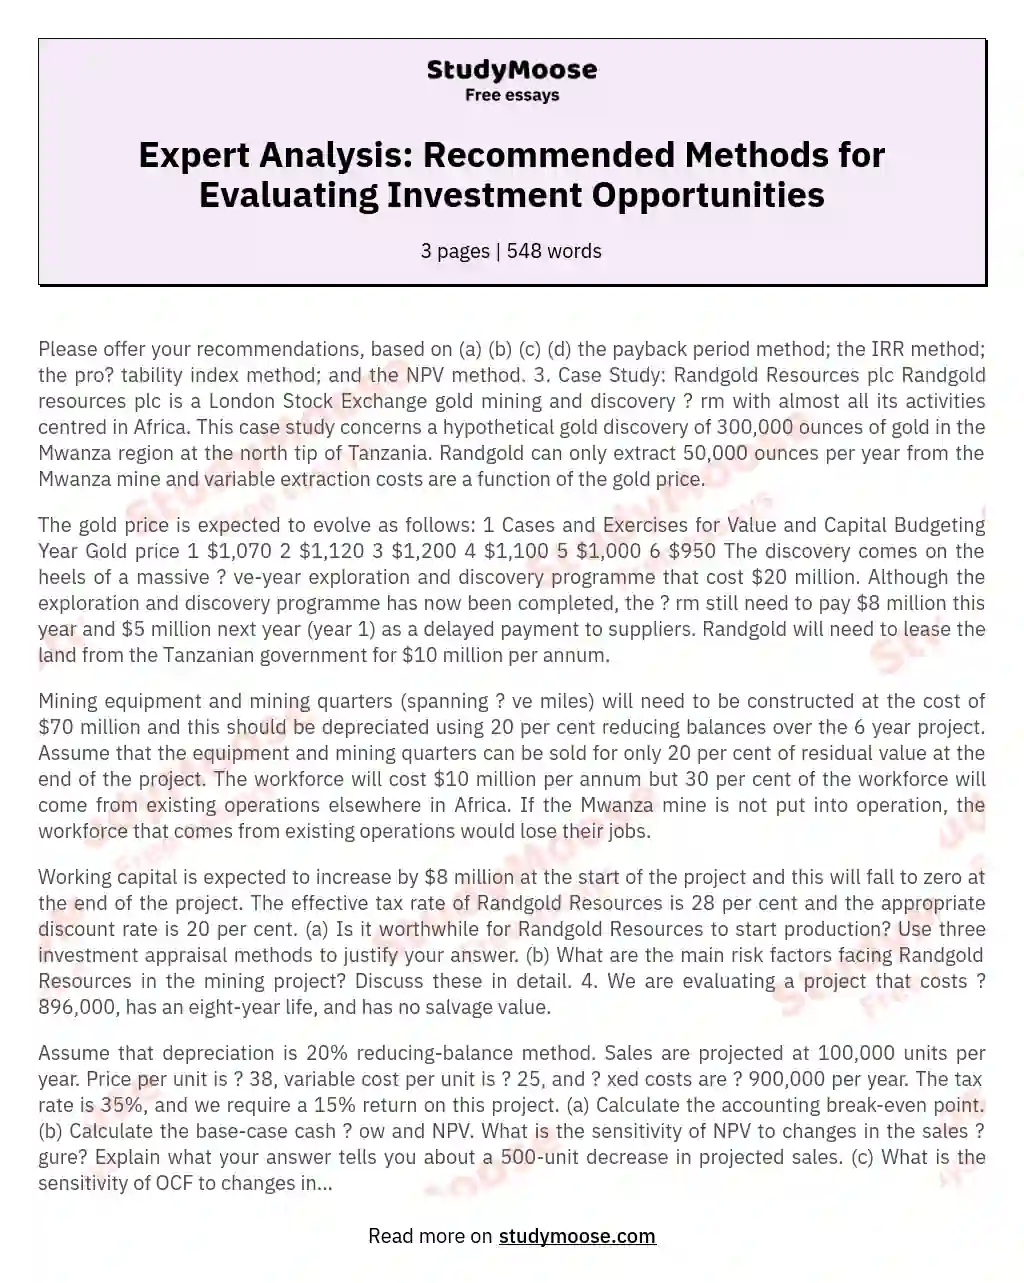 Expert Analysis: Recommended Methods for Evaluating Investment Opportunities essay